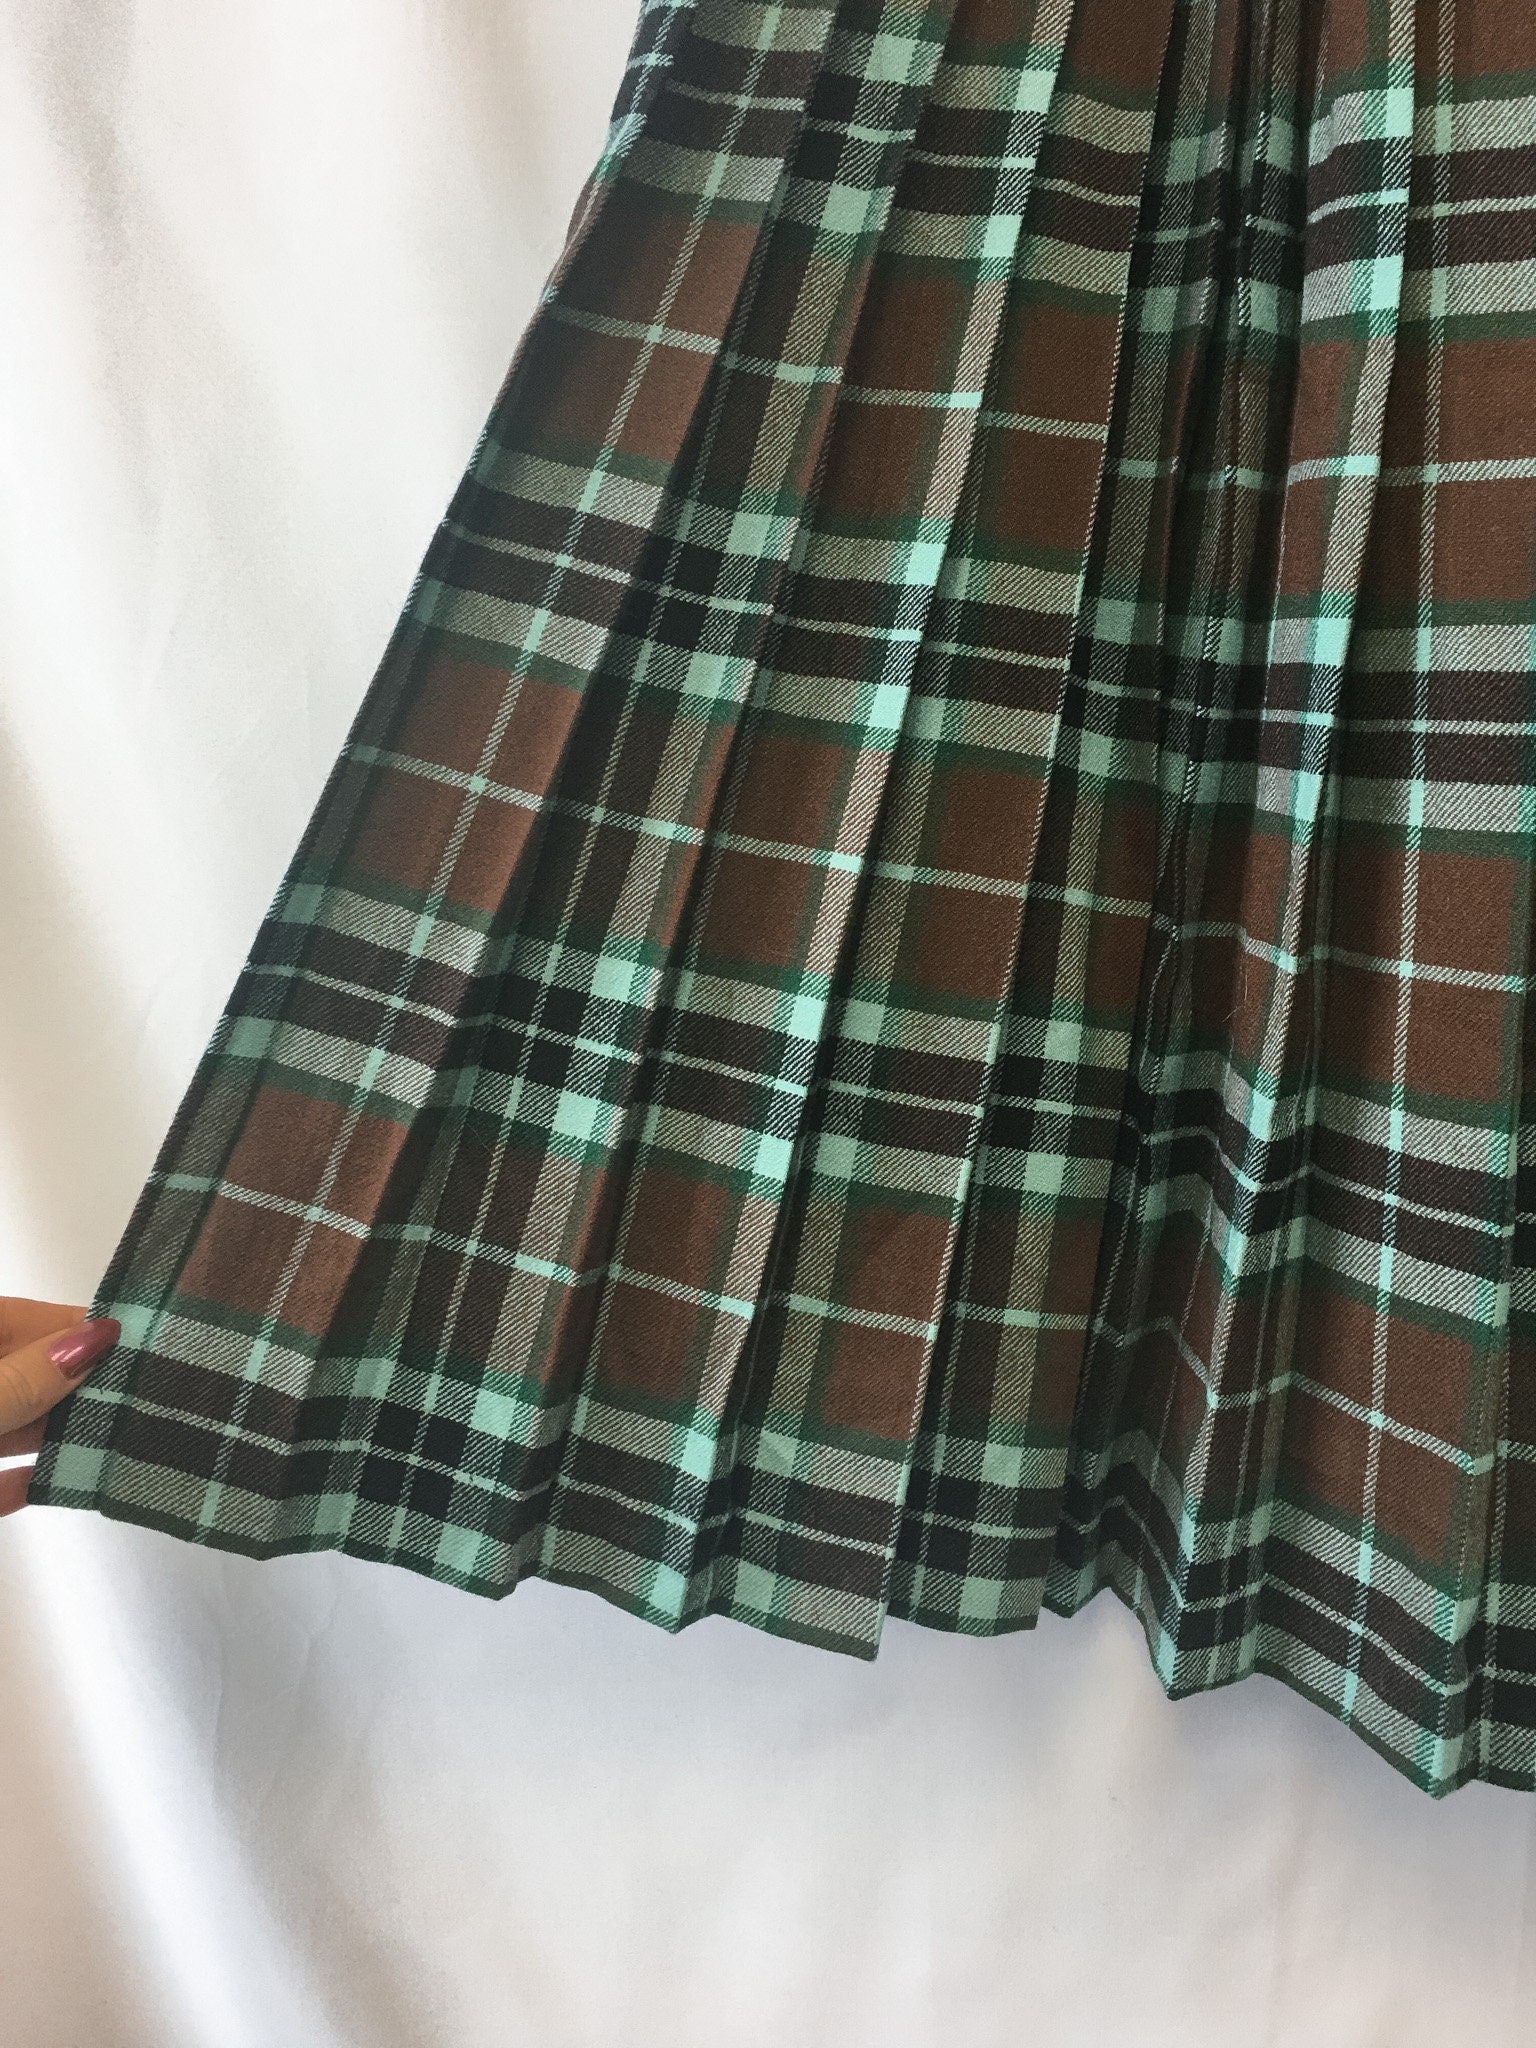 Vintage The Scotch House London Pure Wool Brown and Teal Kilt, Sz. 10, Made in Scotland